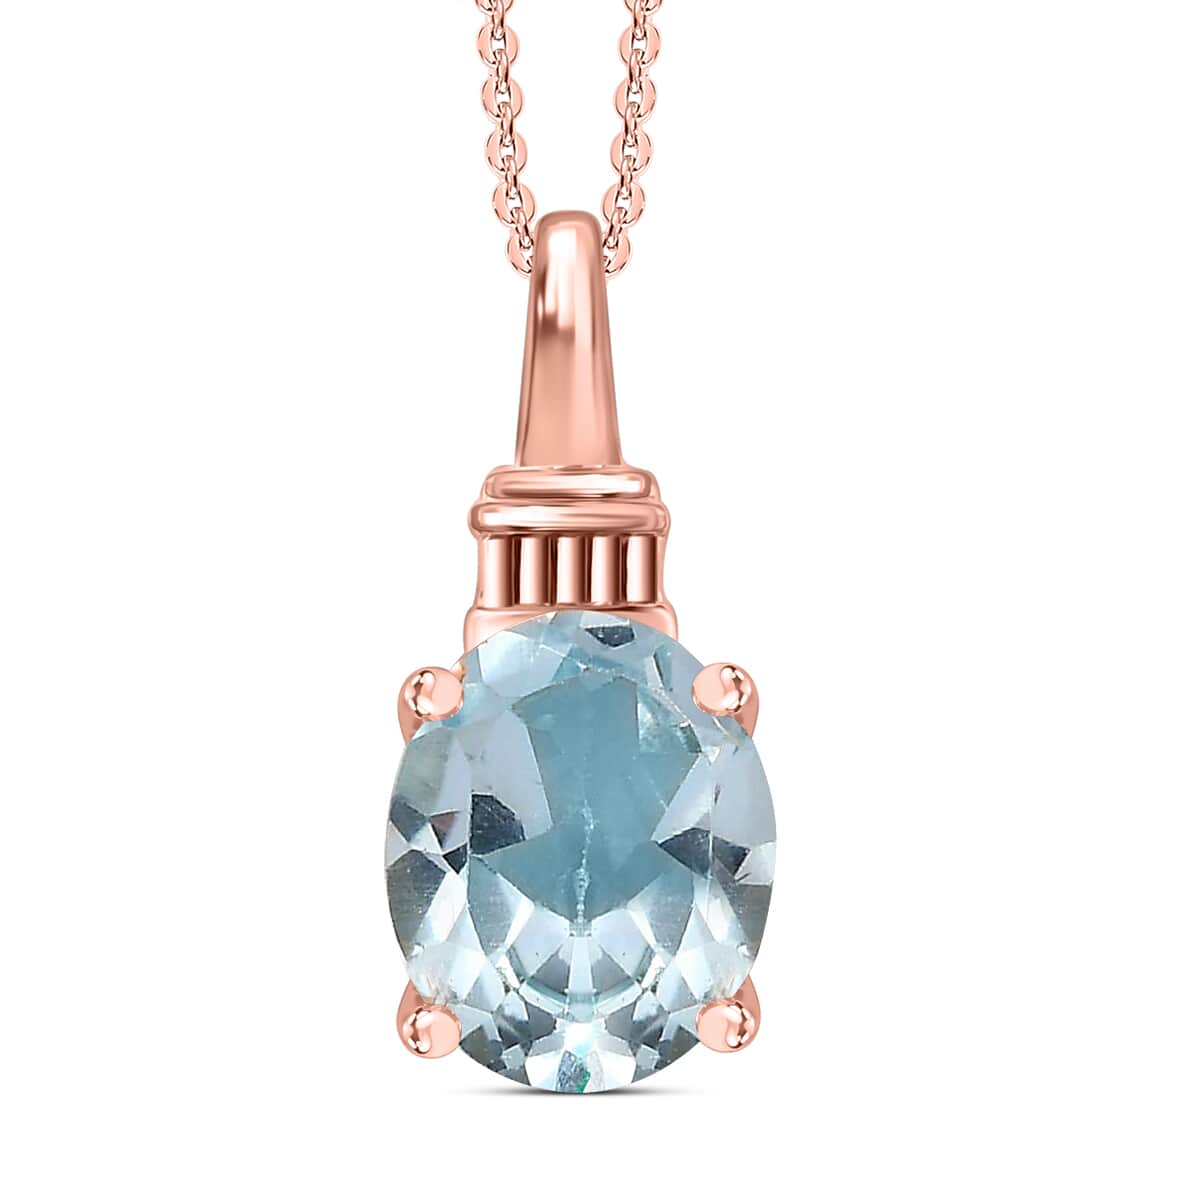 Buy Sky Blue Topaz Solitaire Pendant Necklace 20 Inches in Vermeil